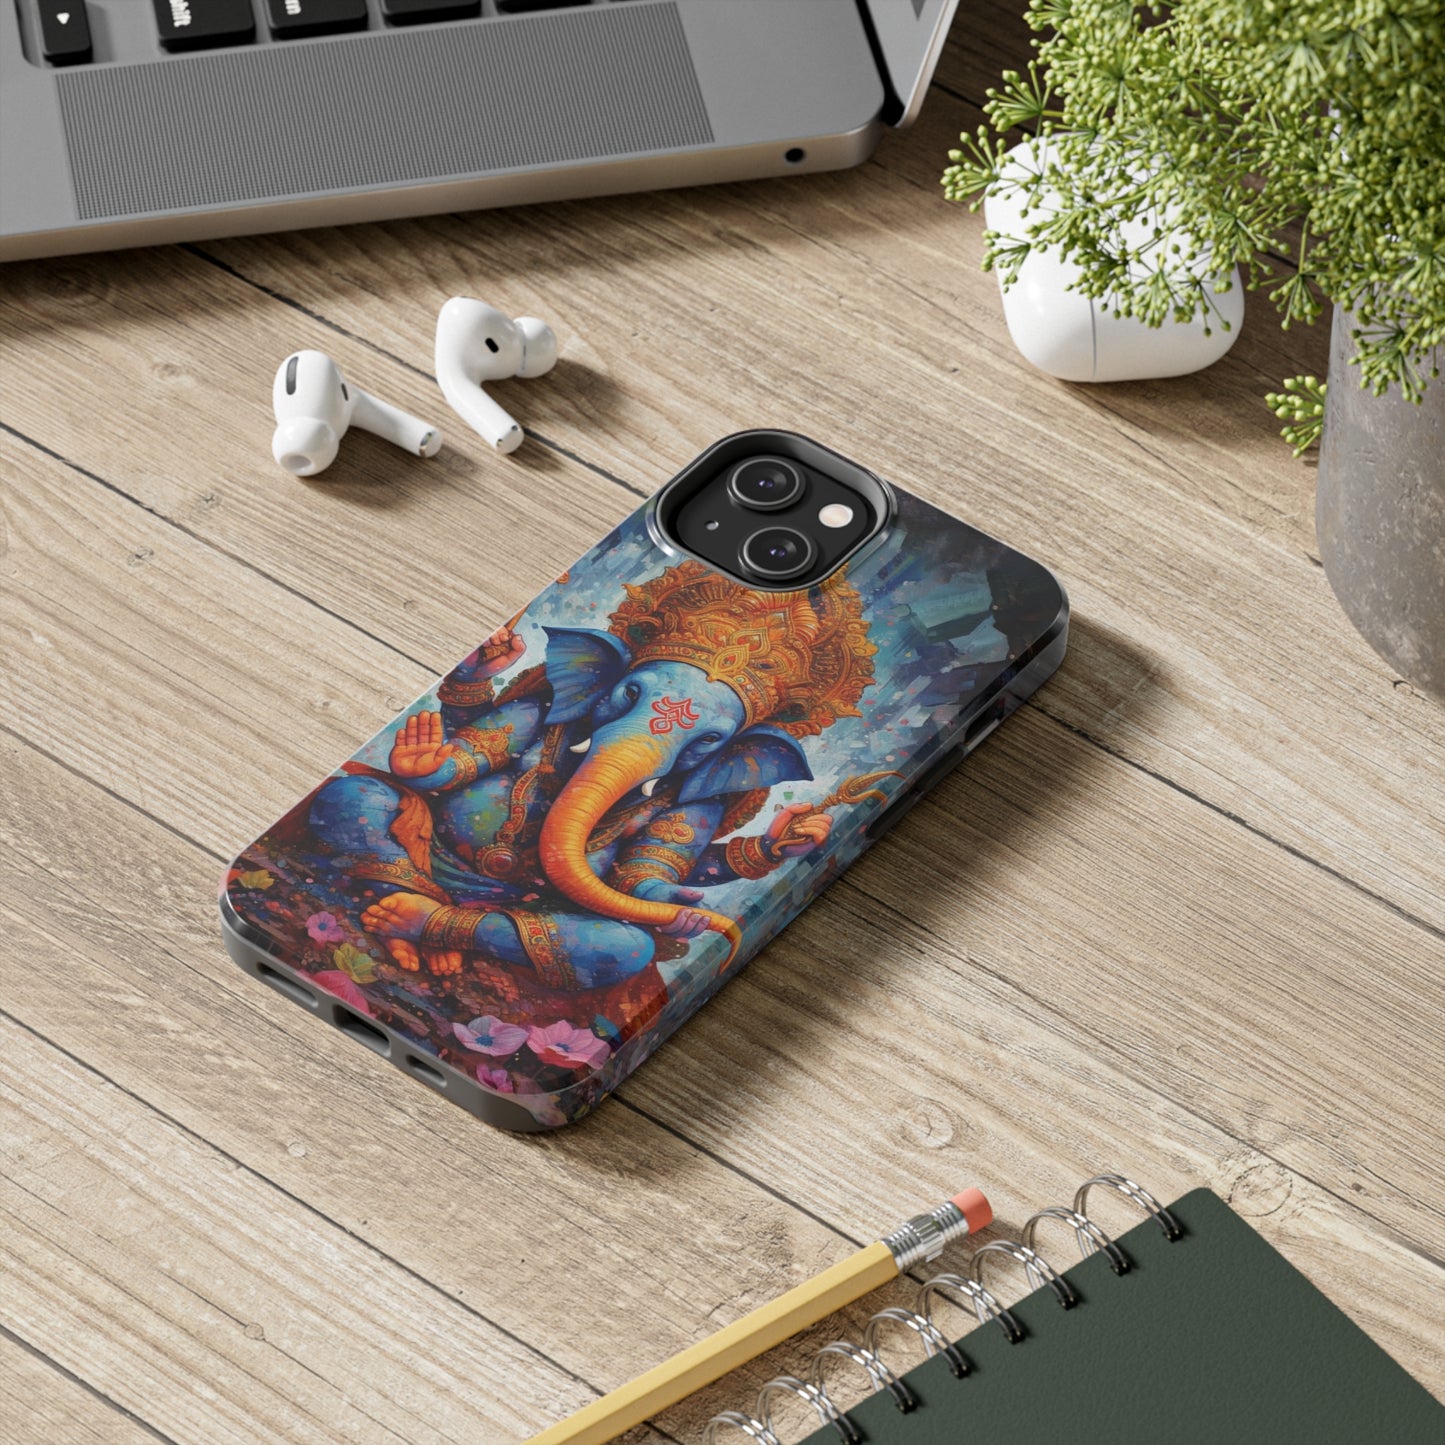 Lord Ganesh psychedelic design on iPhone Tough Case.